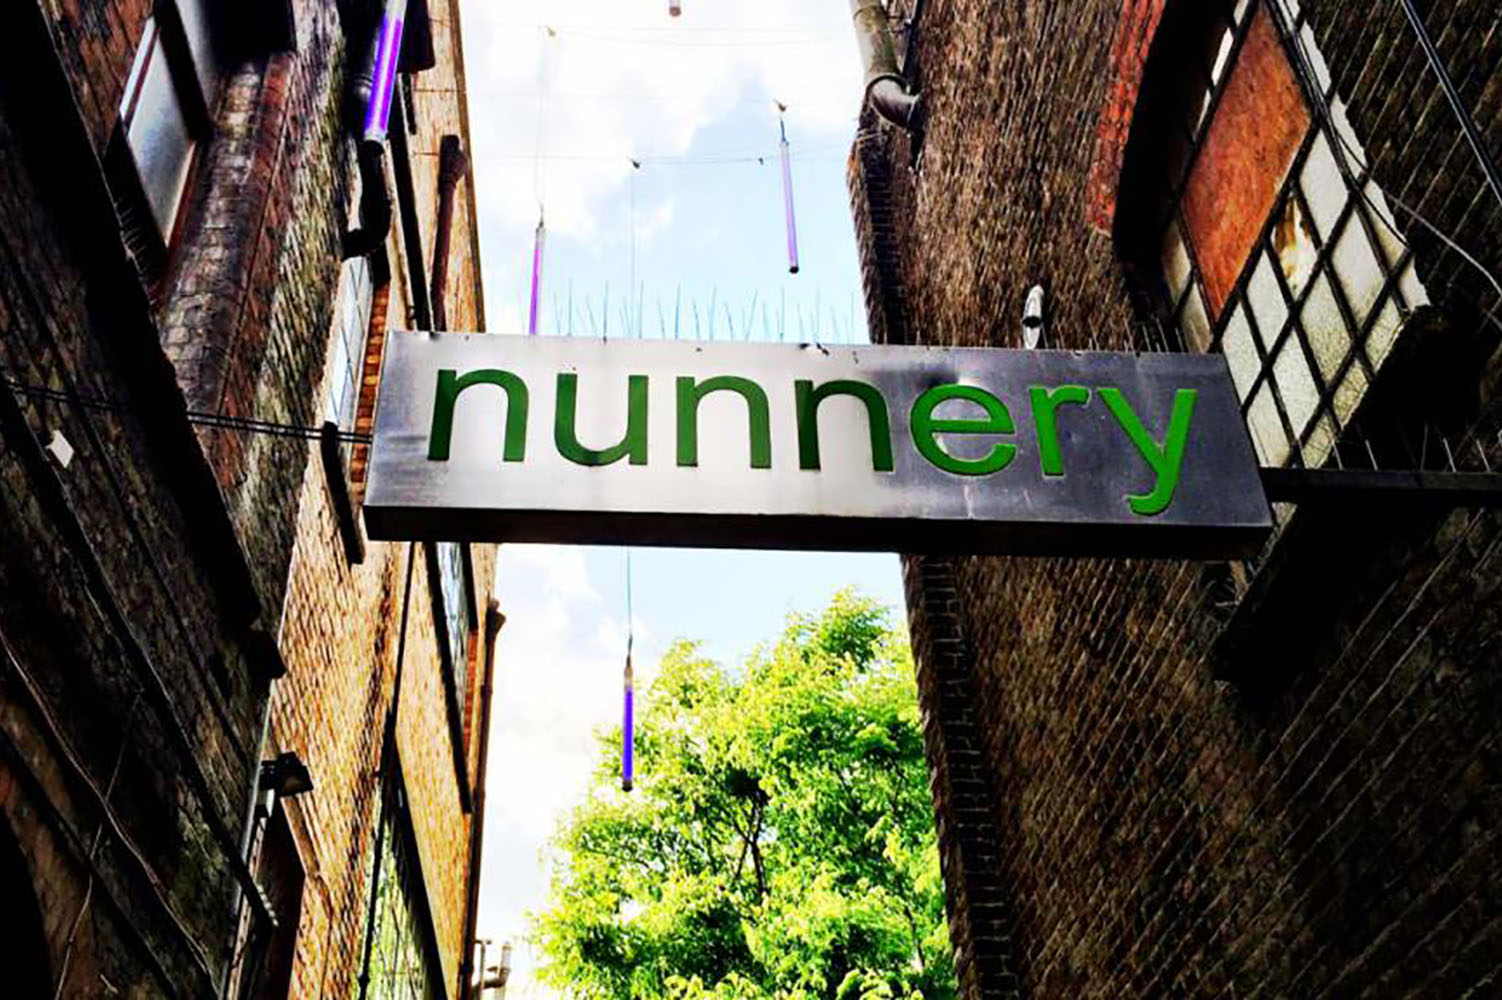 Sign for the Nunnery gallery hanging across Victorian alleyway in Bow East London